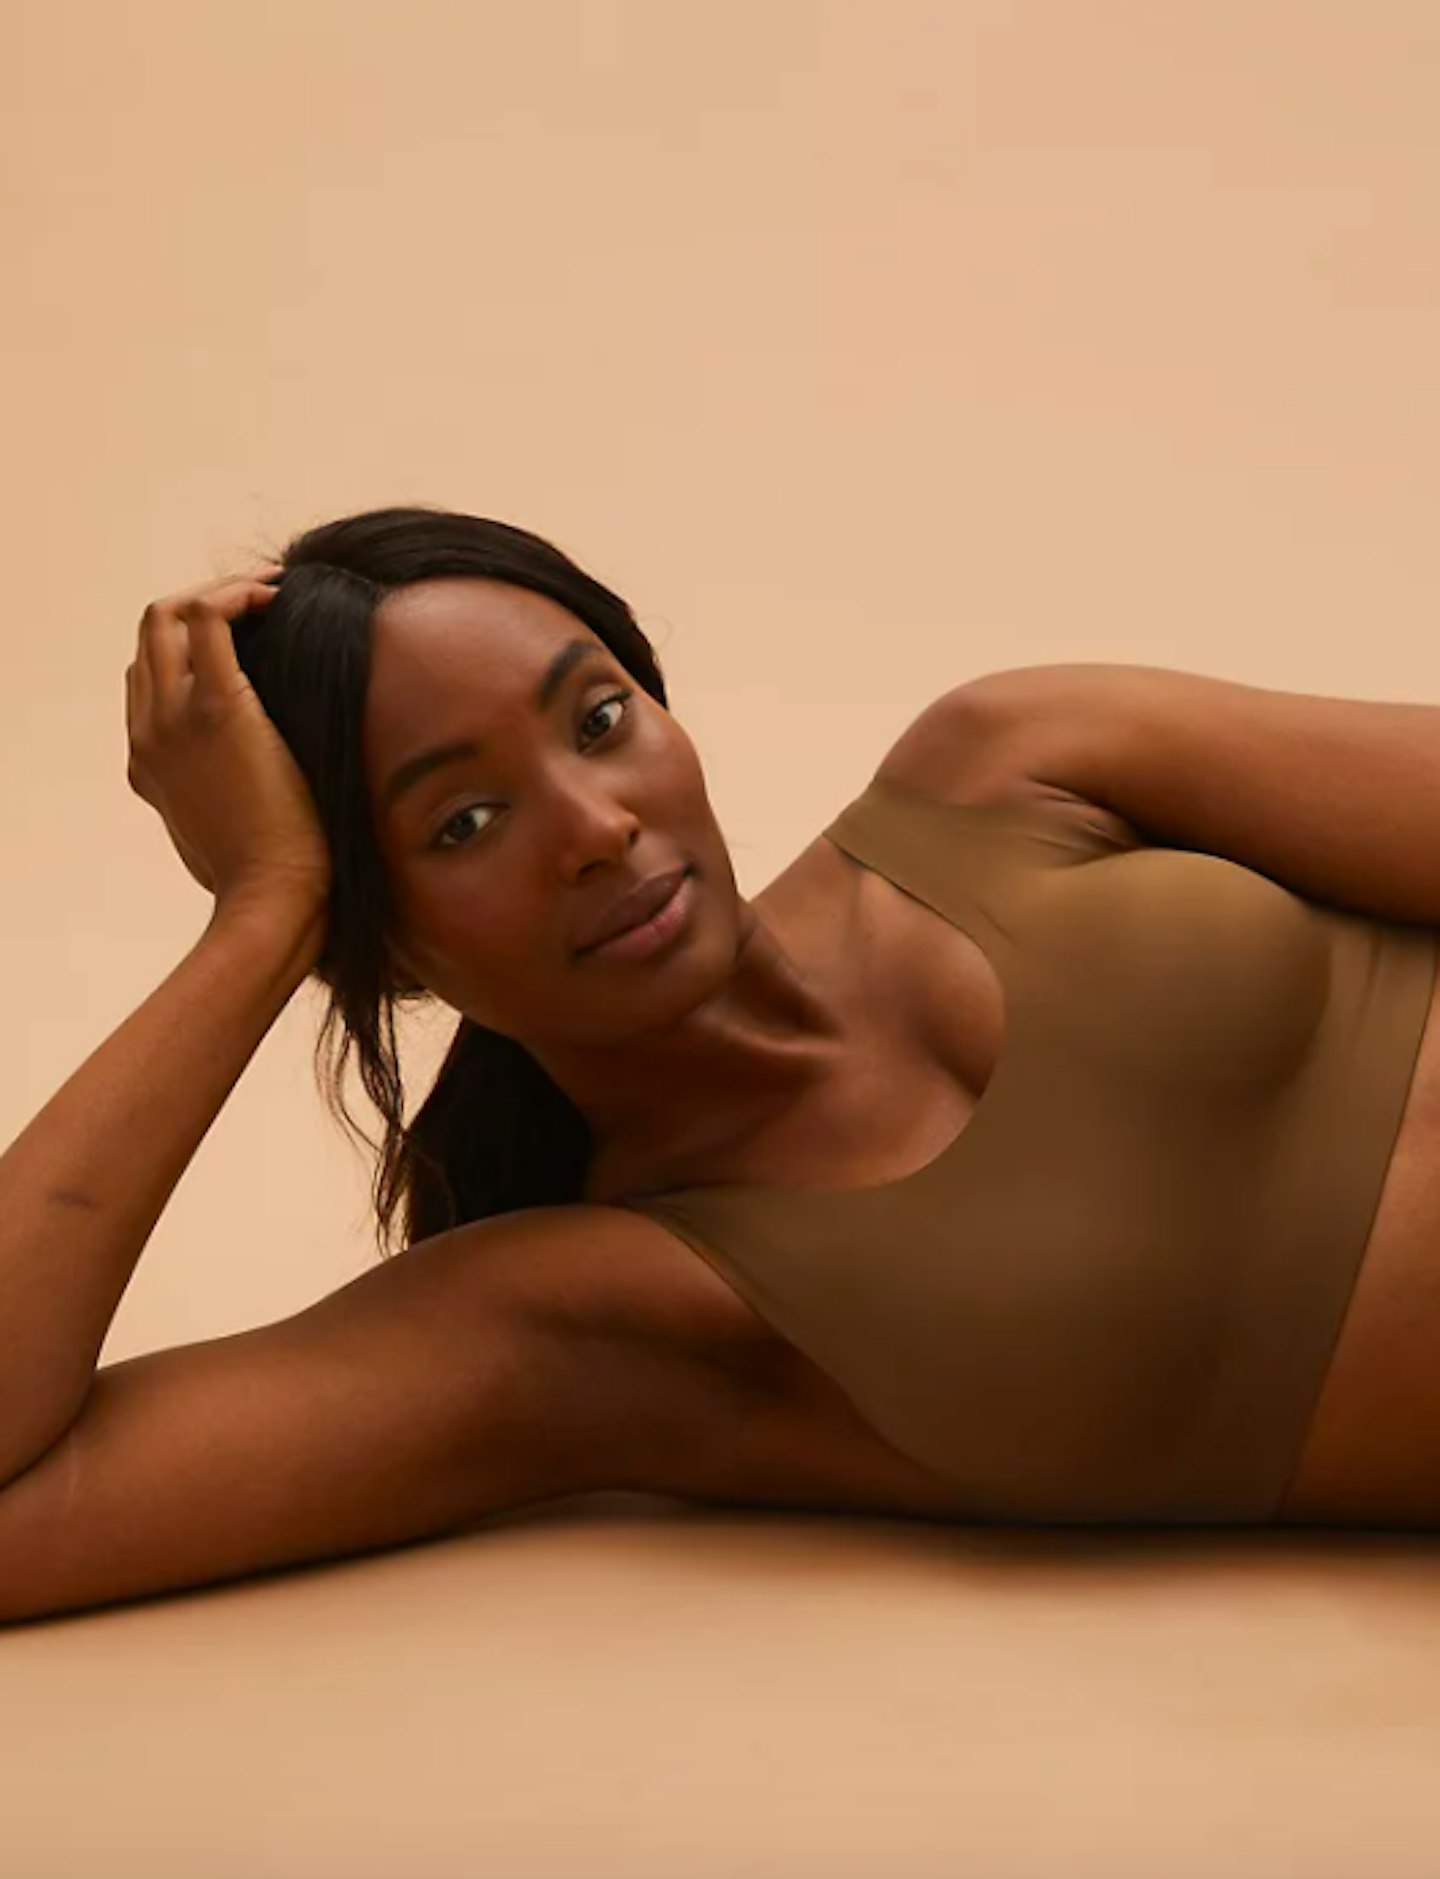 Marks and Spencer launches inclusive skin tone lingerie line